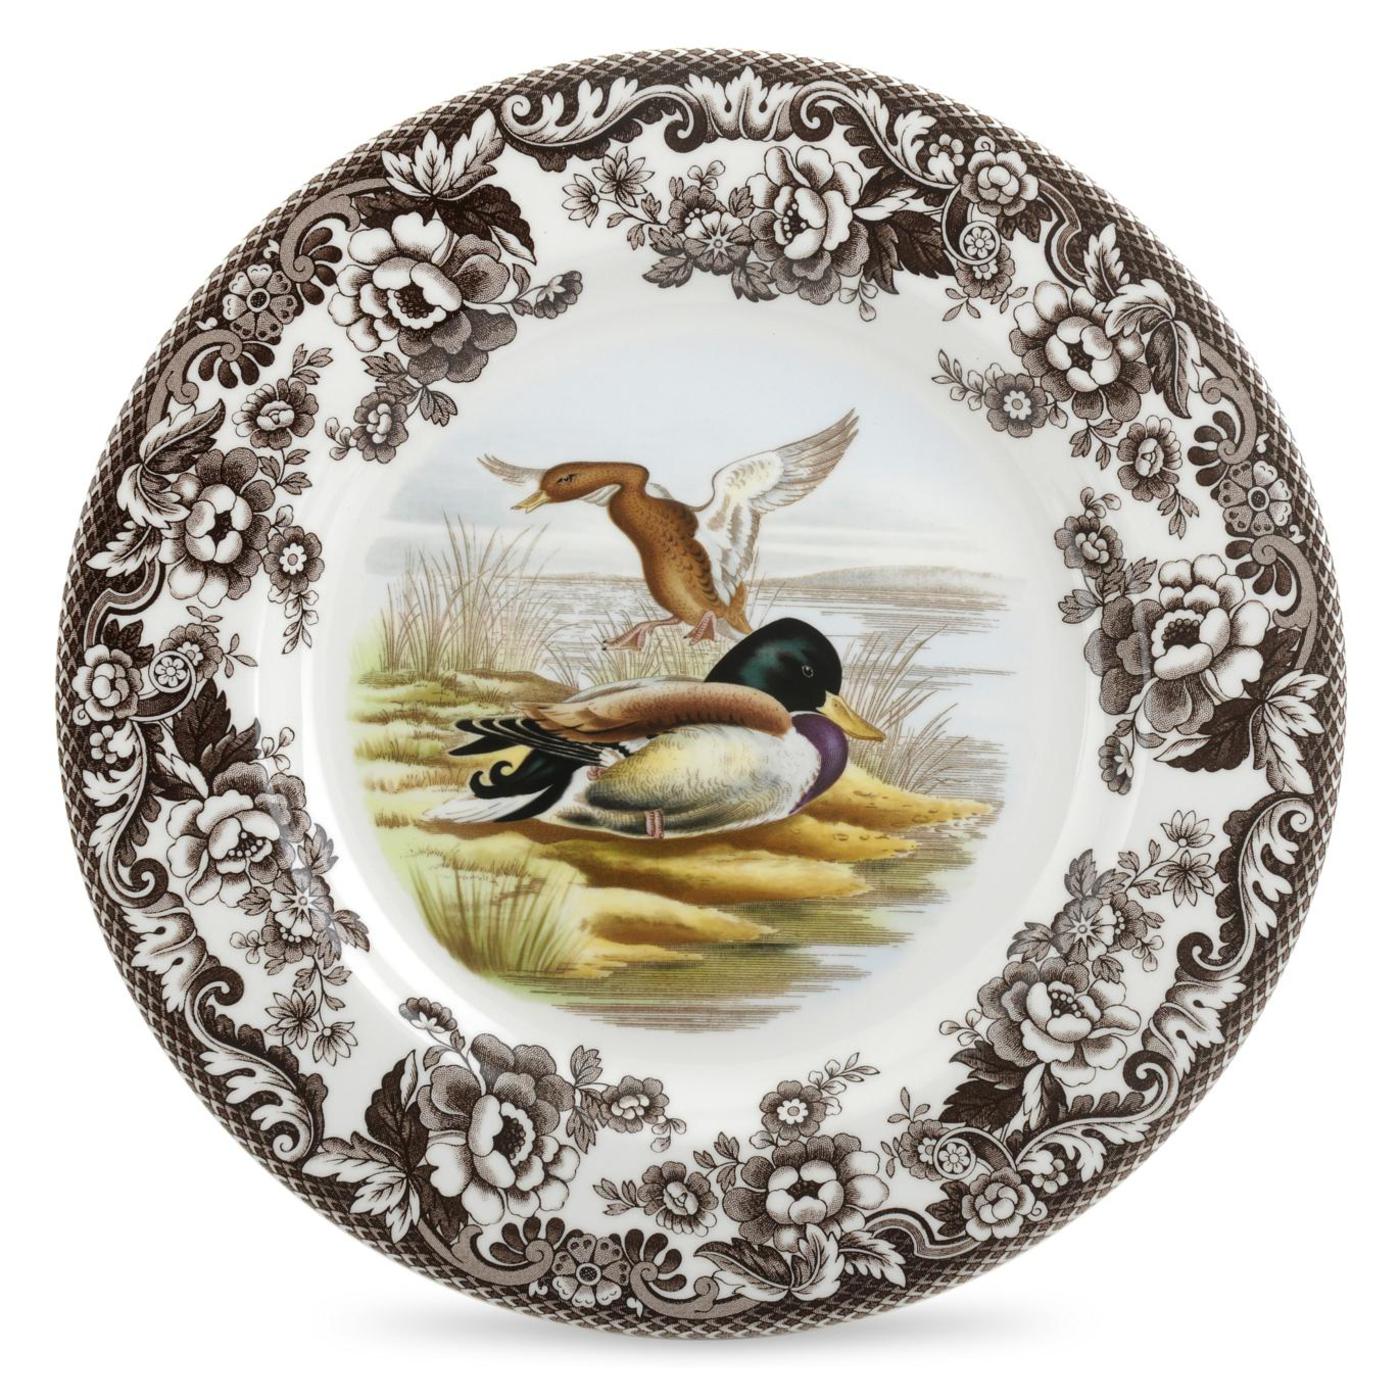 Spode Woodland Dinner Plate 10.5" - Individual-HOME/GIFTWARE-MALLARD-Kevin's Fine Outdoor Gear & Apparel